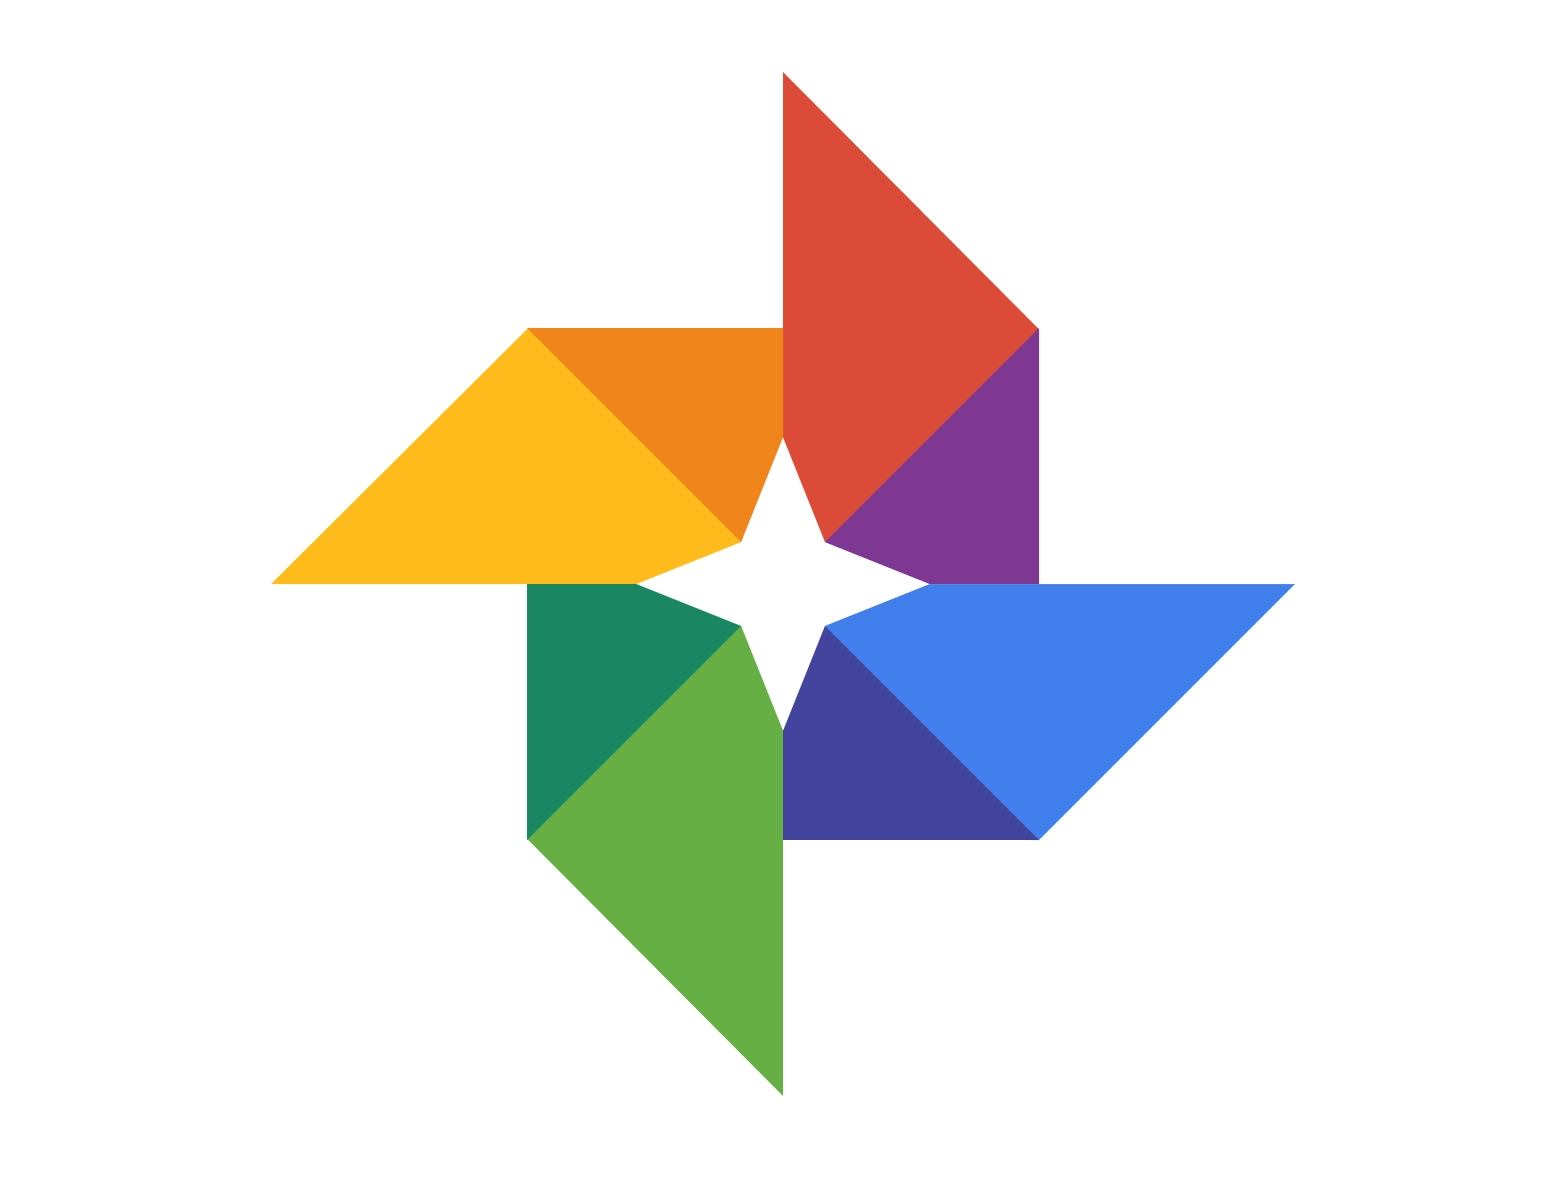 Google Photos - for some reason we don't have an alt tag here